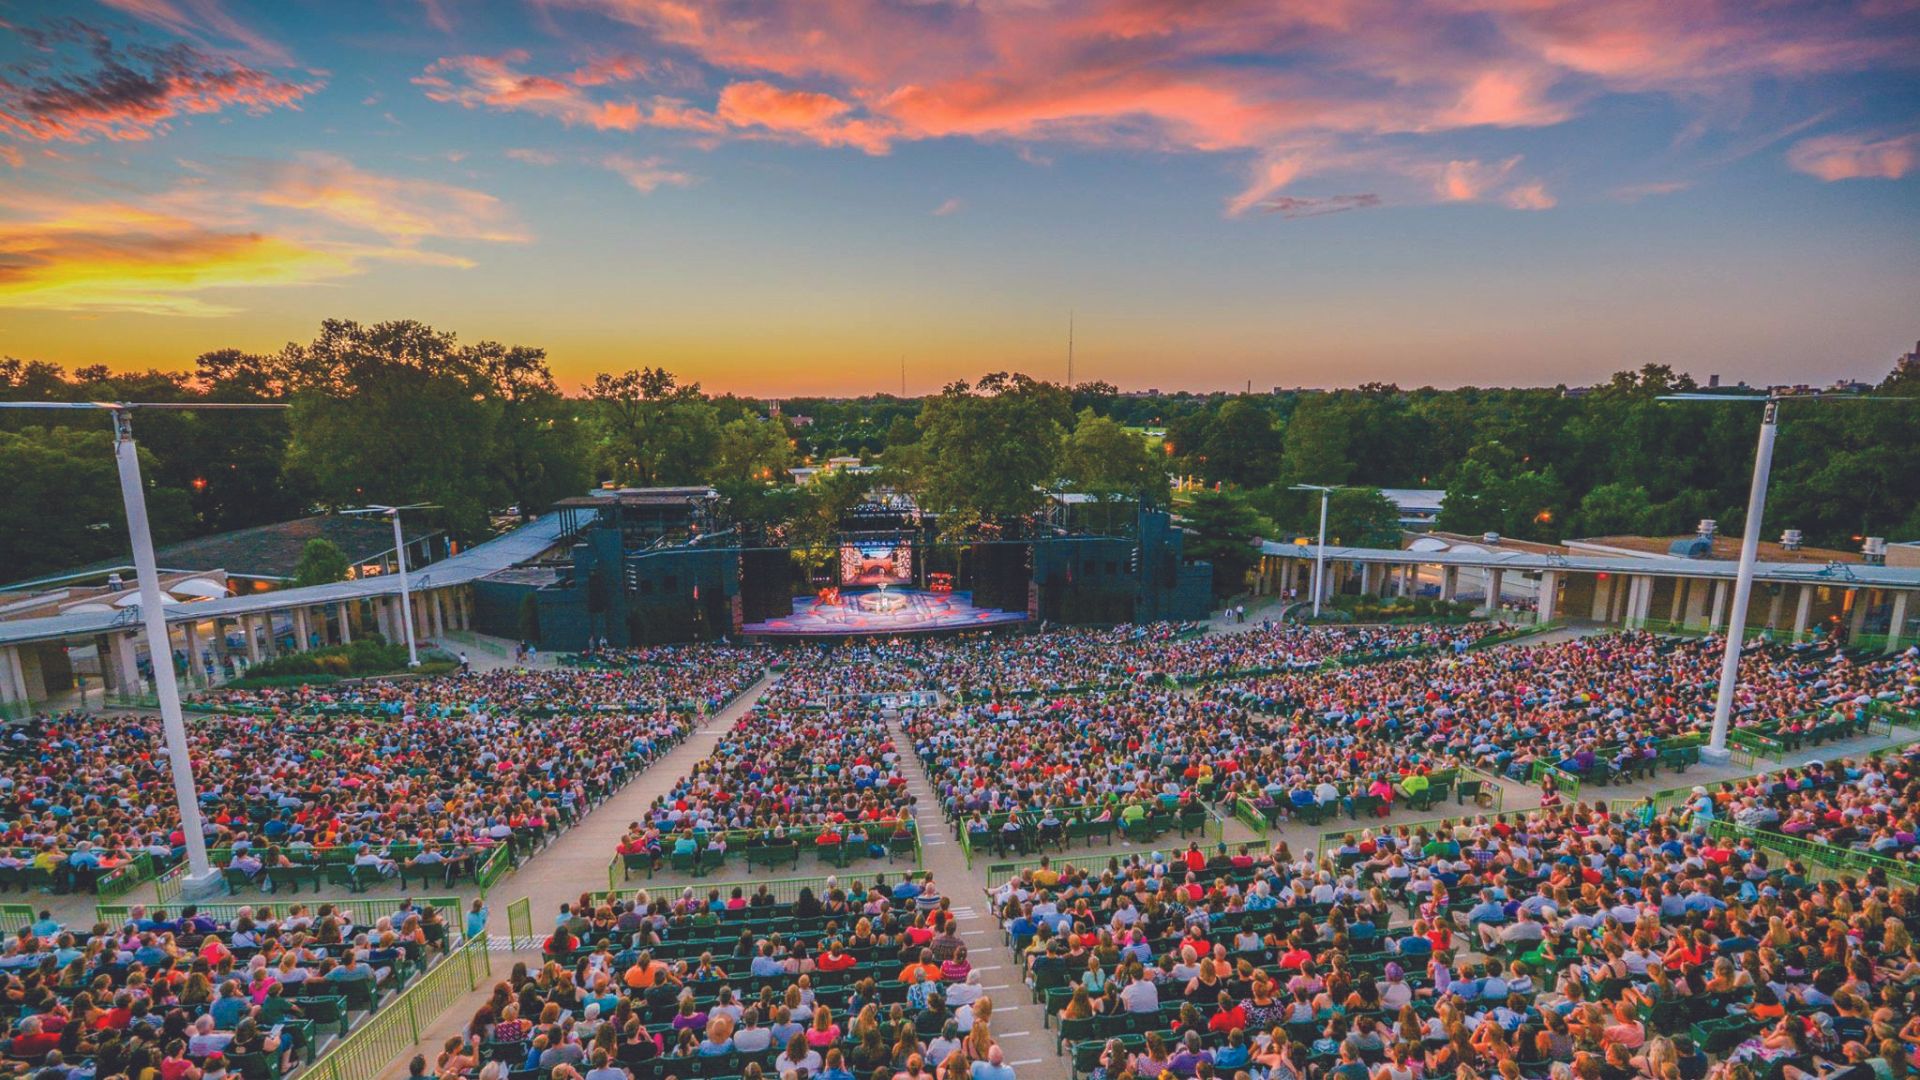 Thousands of theatergoers watch a Broadway performance at The Muny.